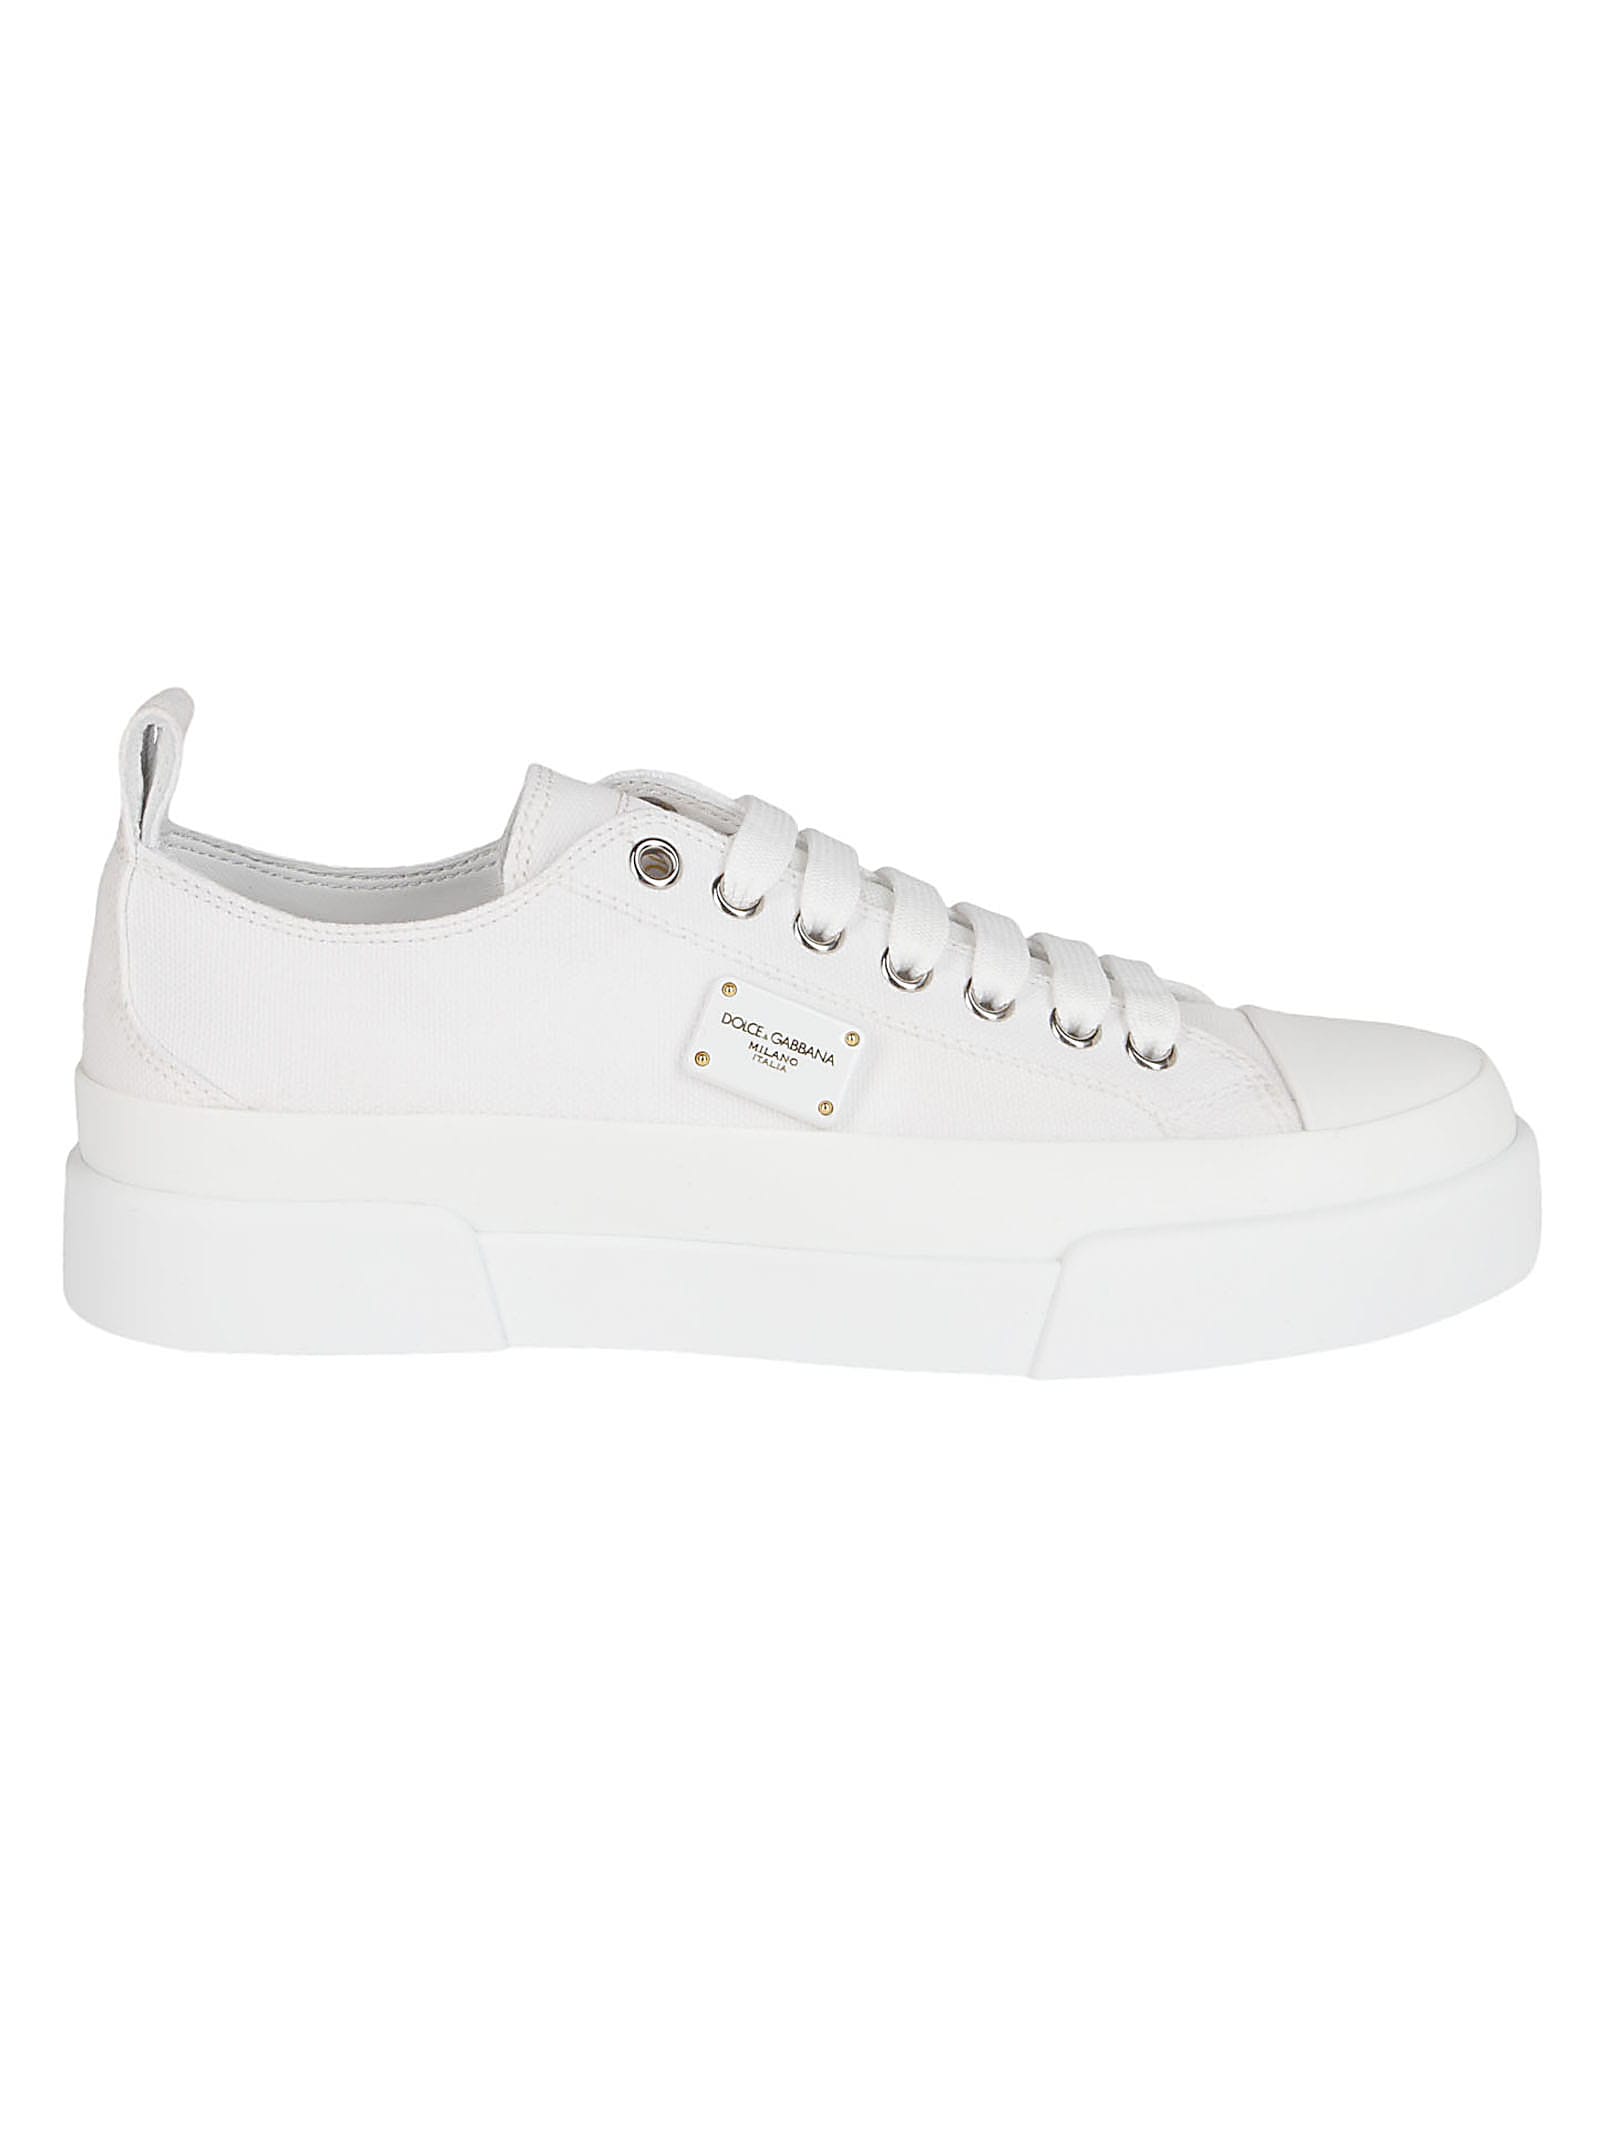 Dolce & Gabbana White Leather Trainers In White Nude